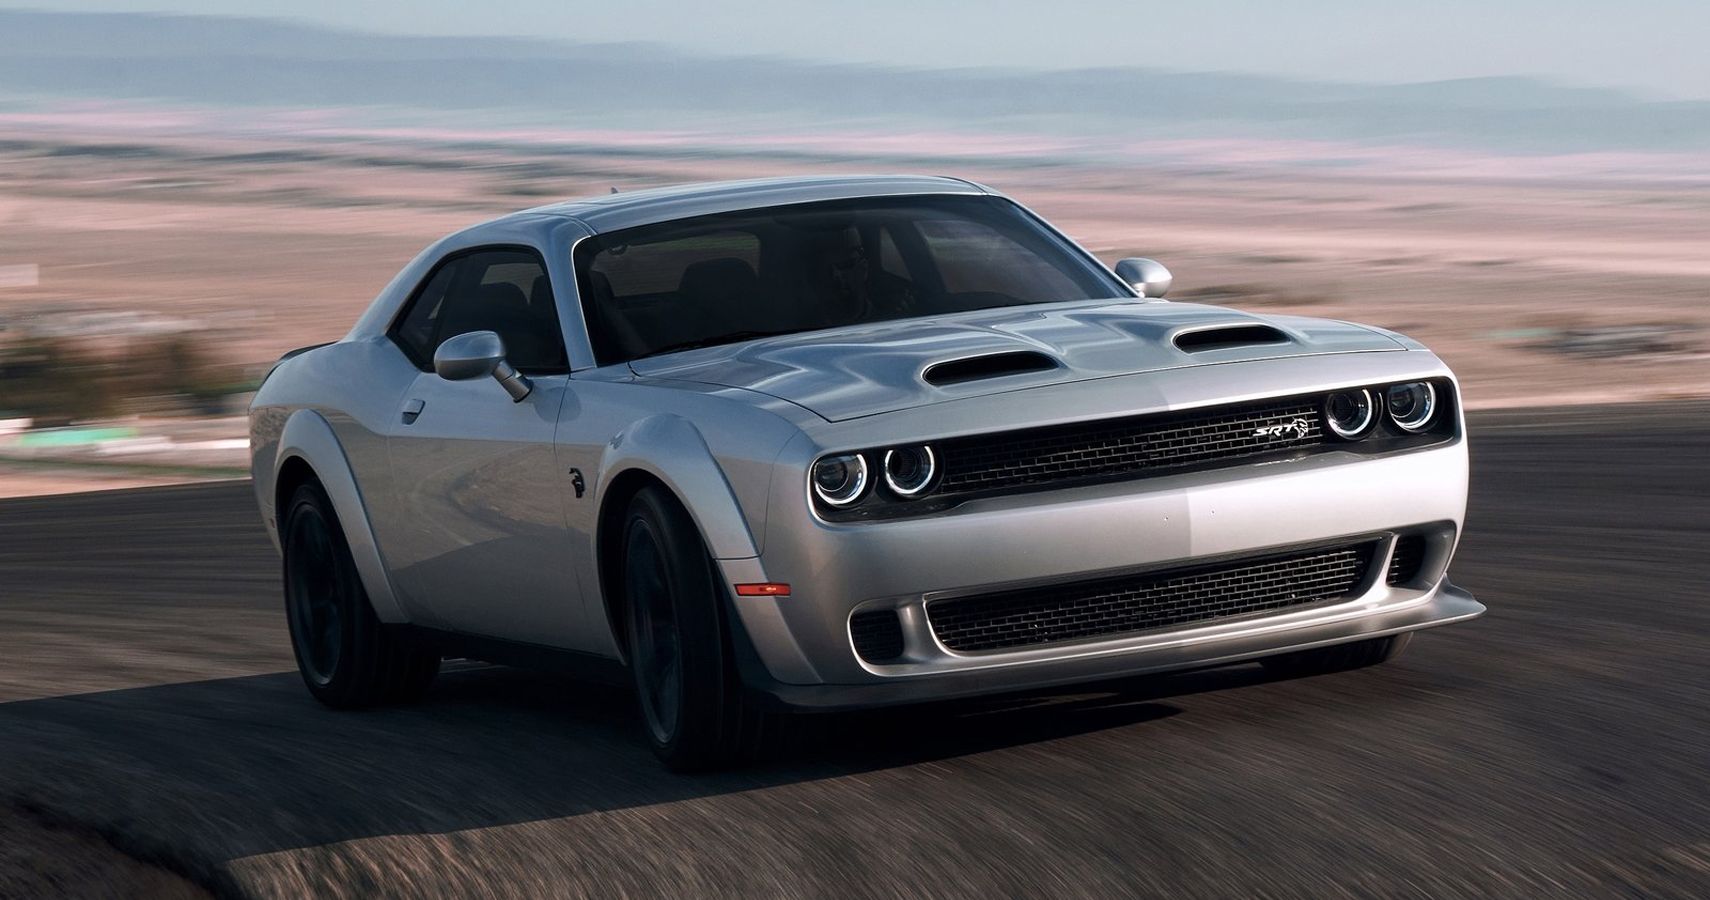 2023 Dodge Challenger SRT Hellcat Now With Manual Transmission